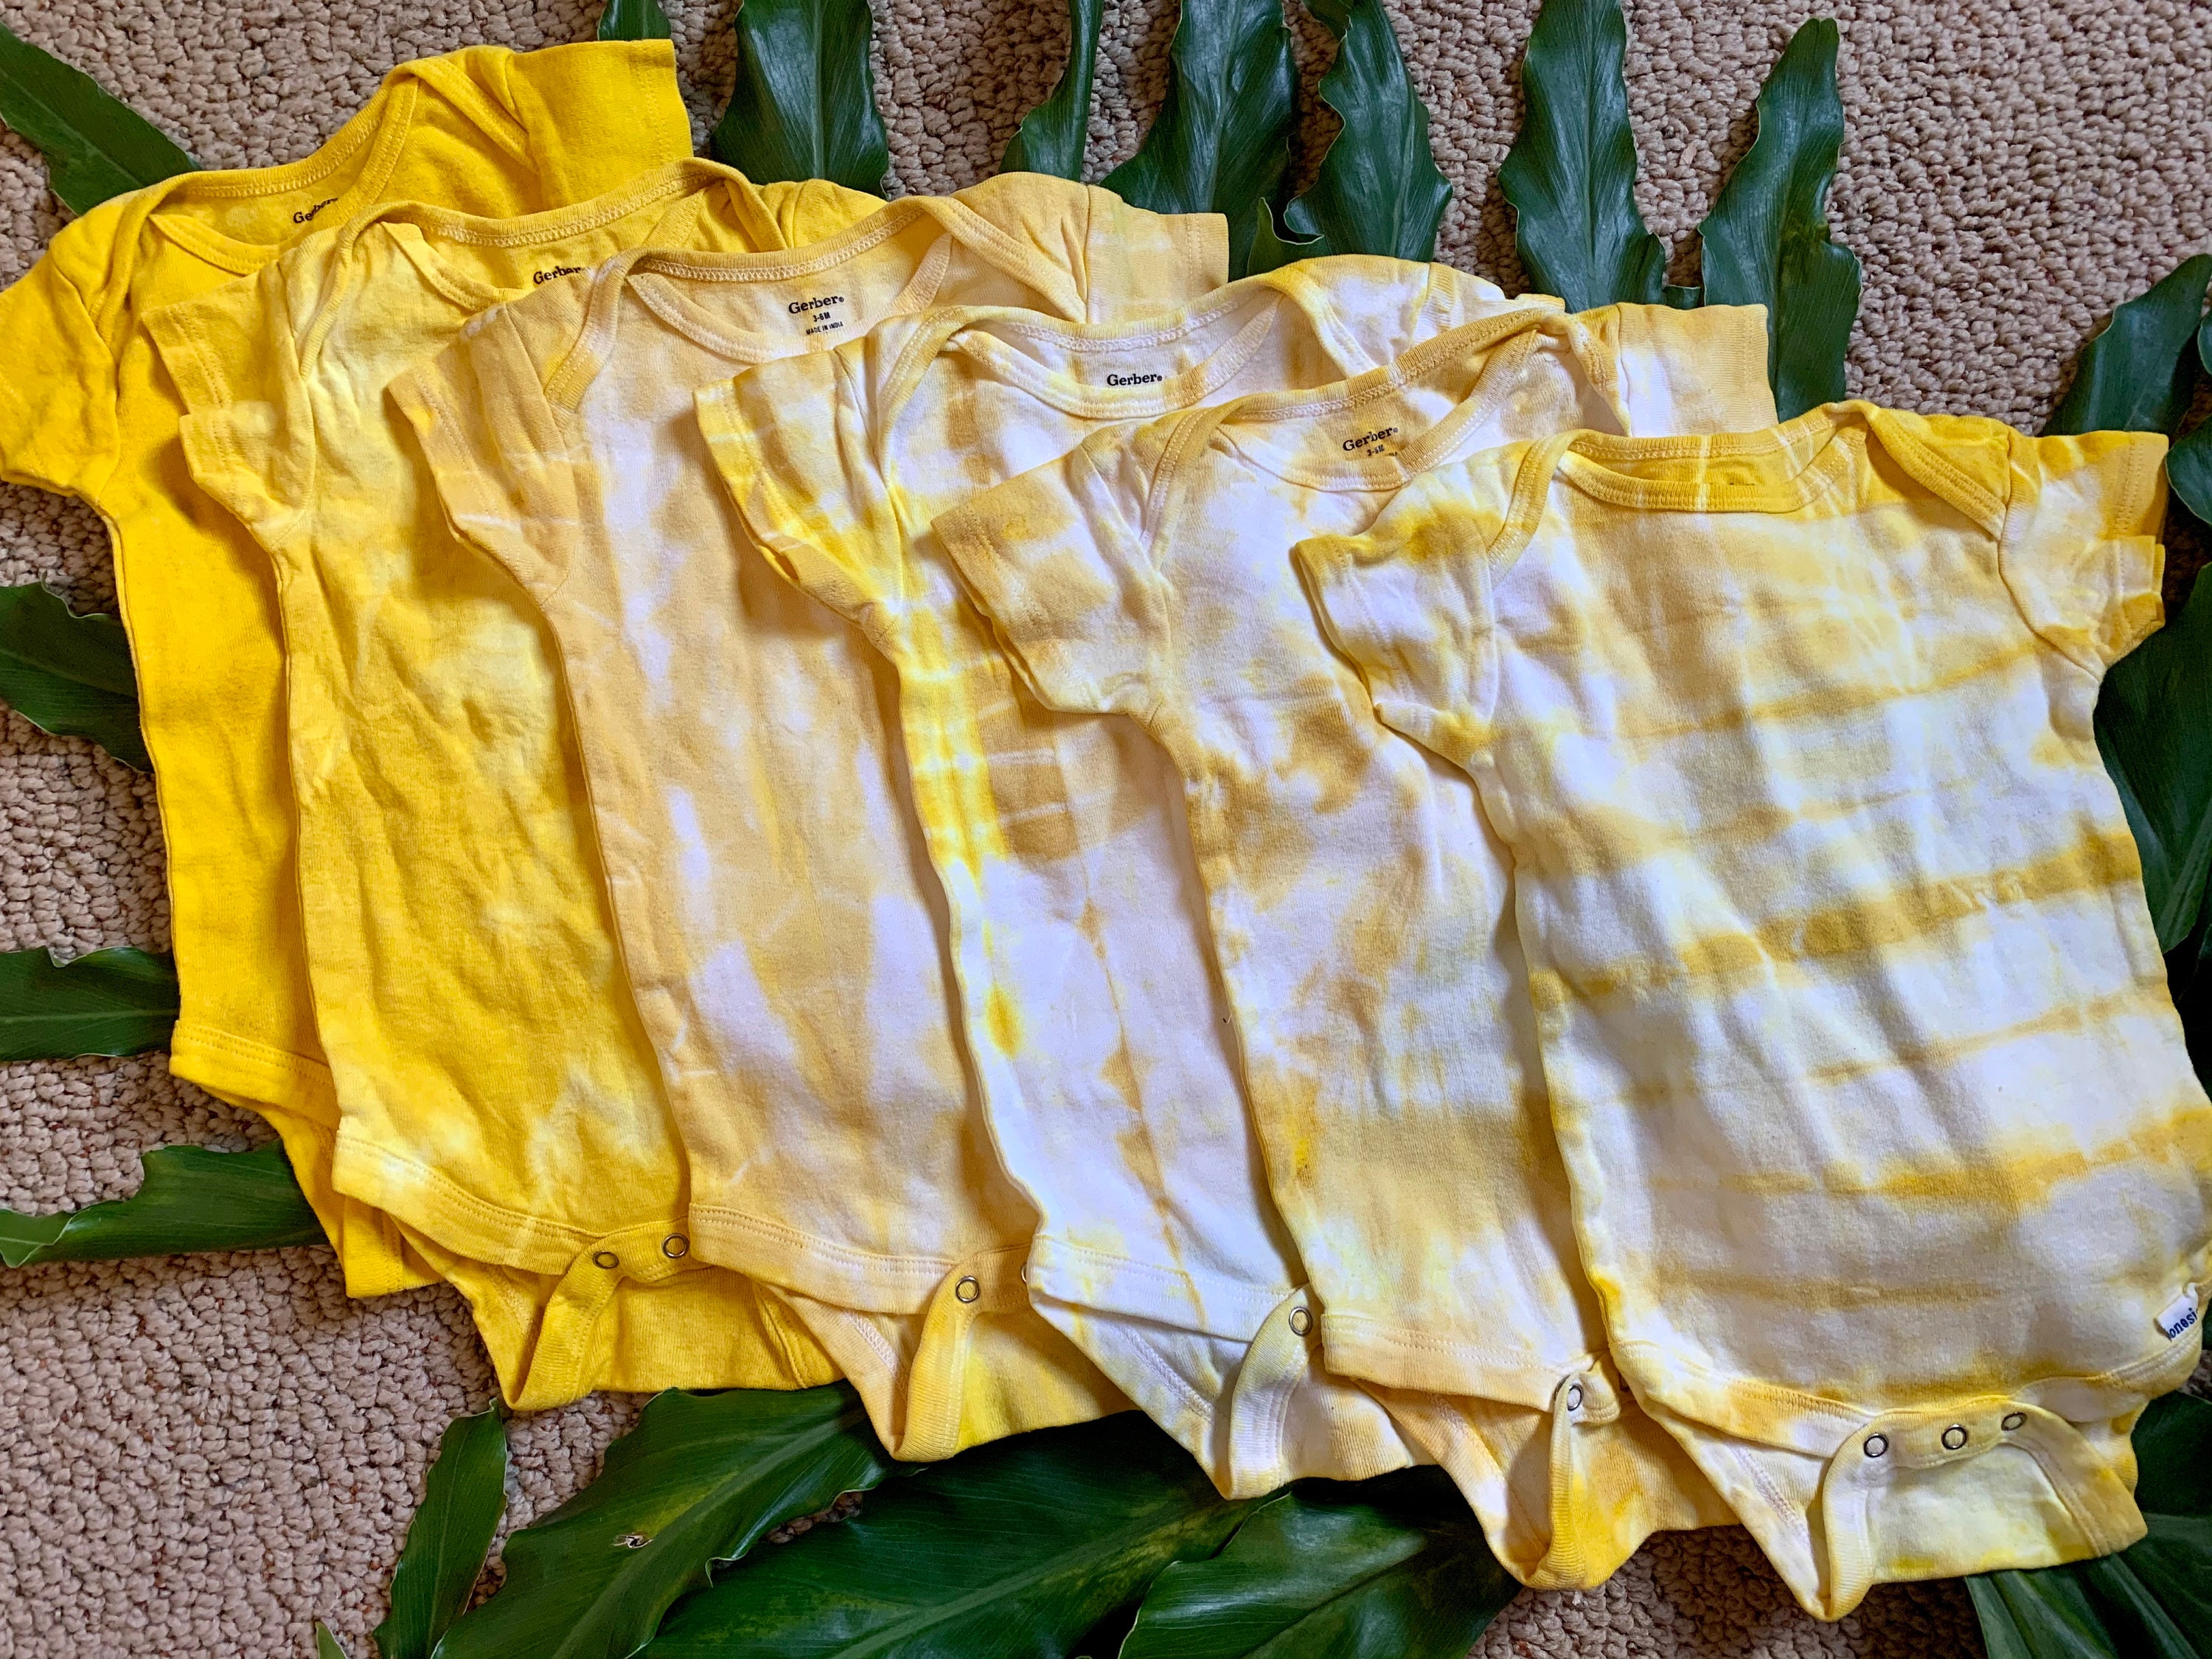 VEGGIE PATCH KIDS Plant Dyed Onesies for Baby Short Sleeve Onesies Dyed  With Avocado, Beet, Spinach, Turmeric, Blueberry and Flowers 